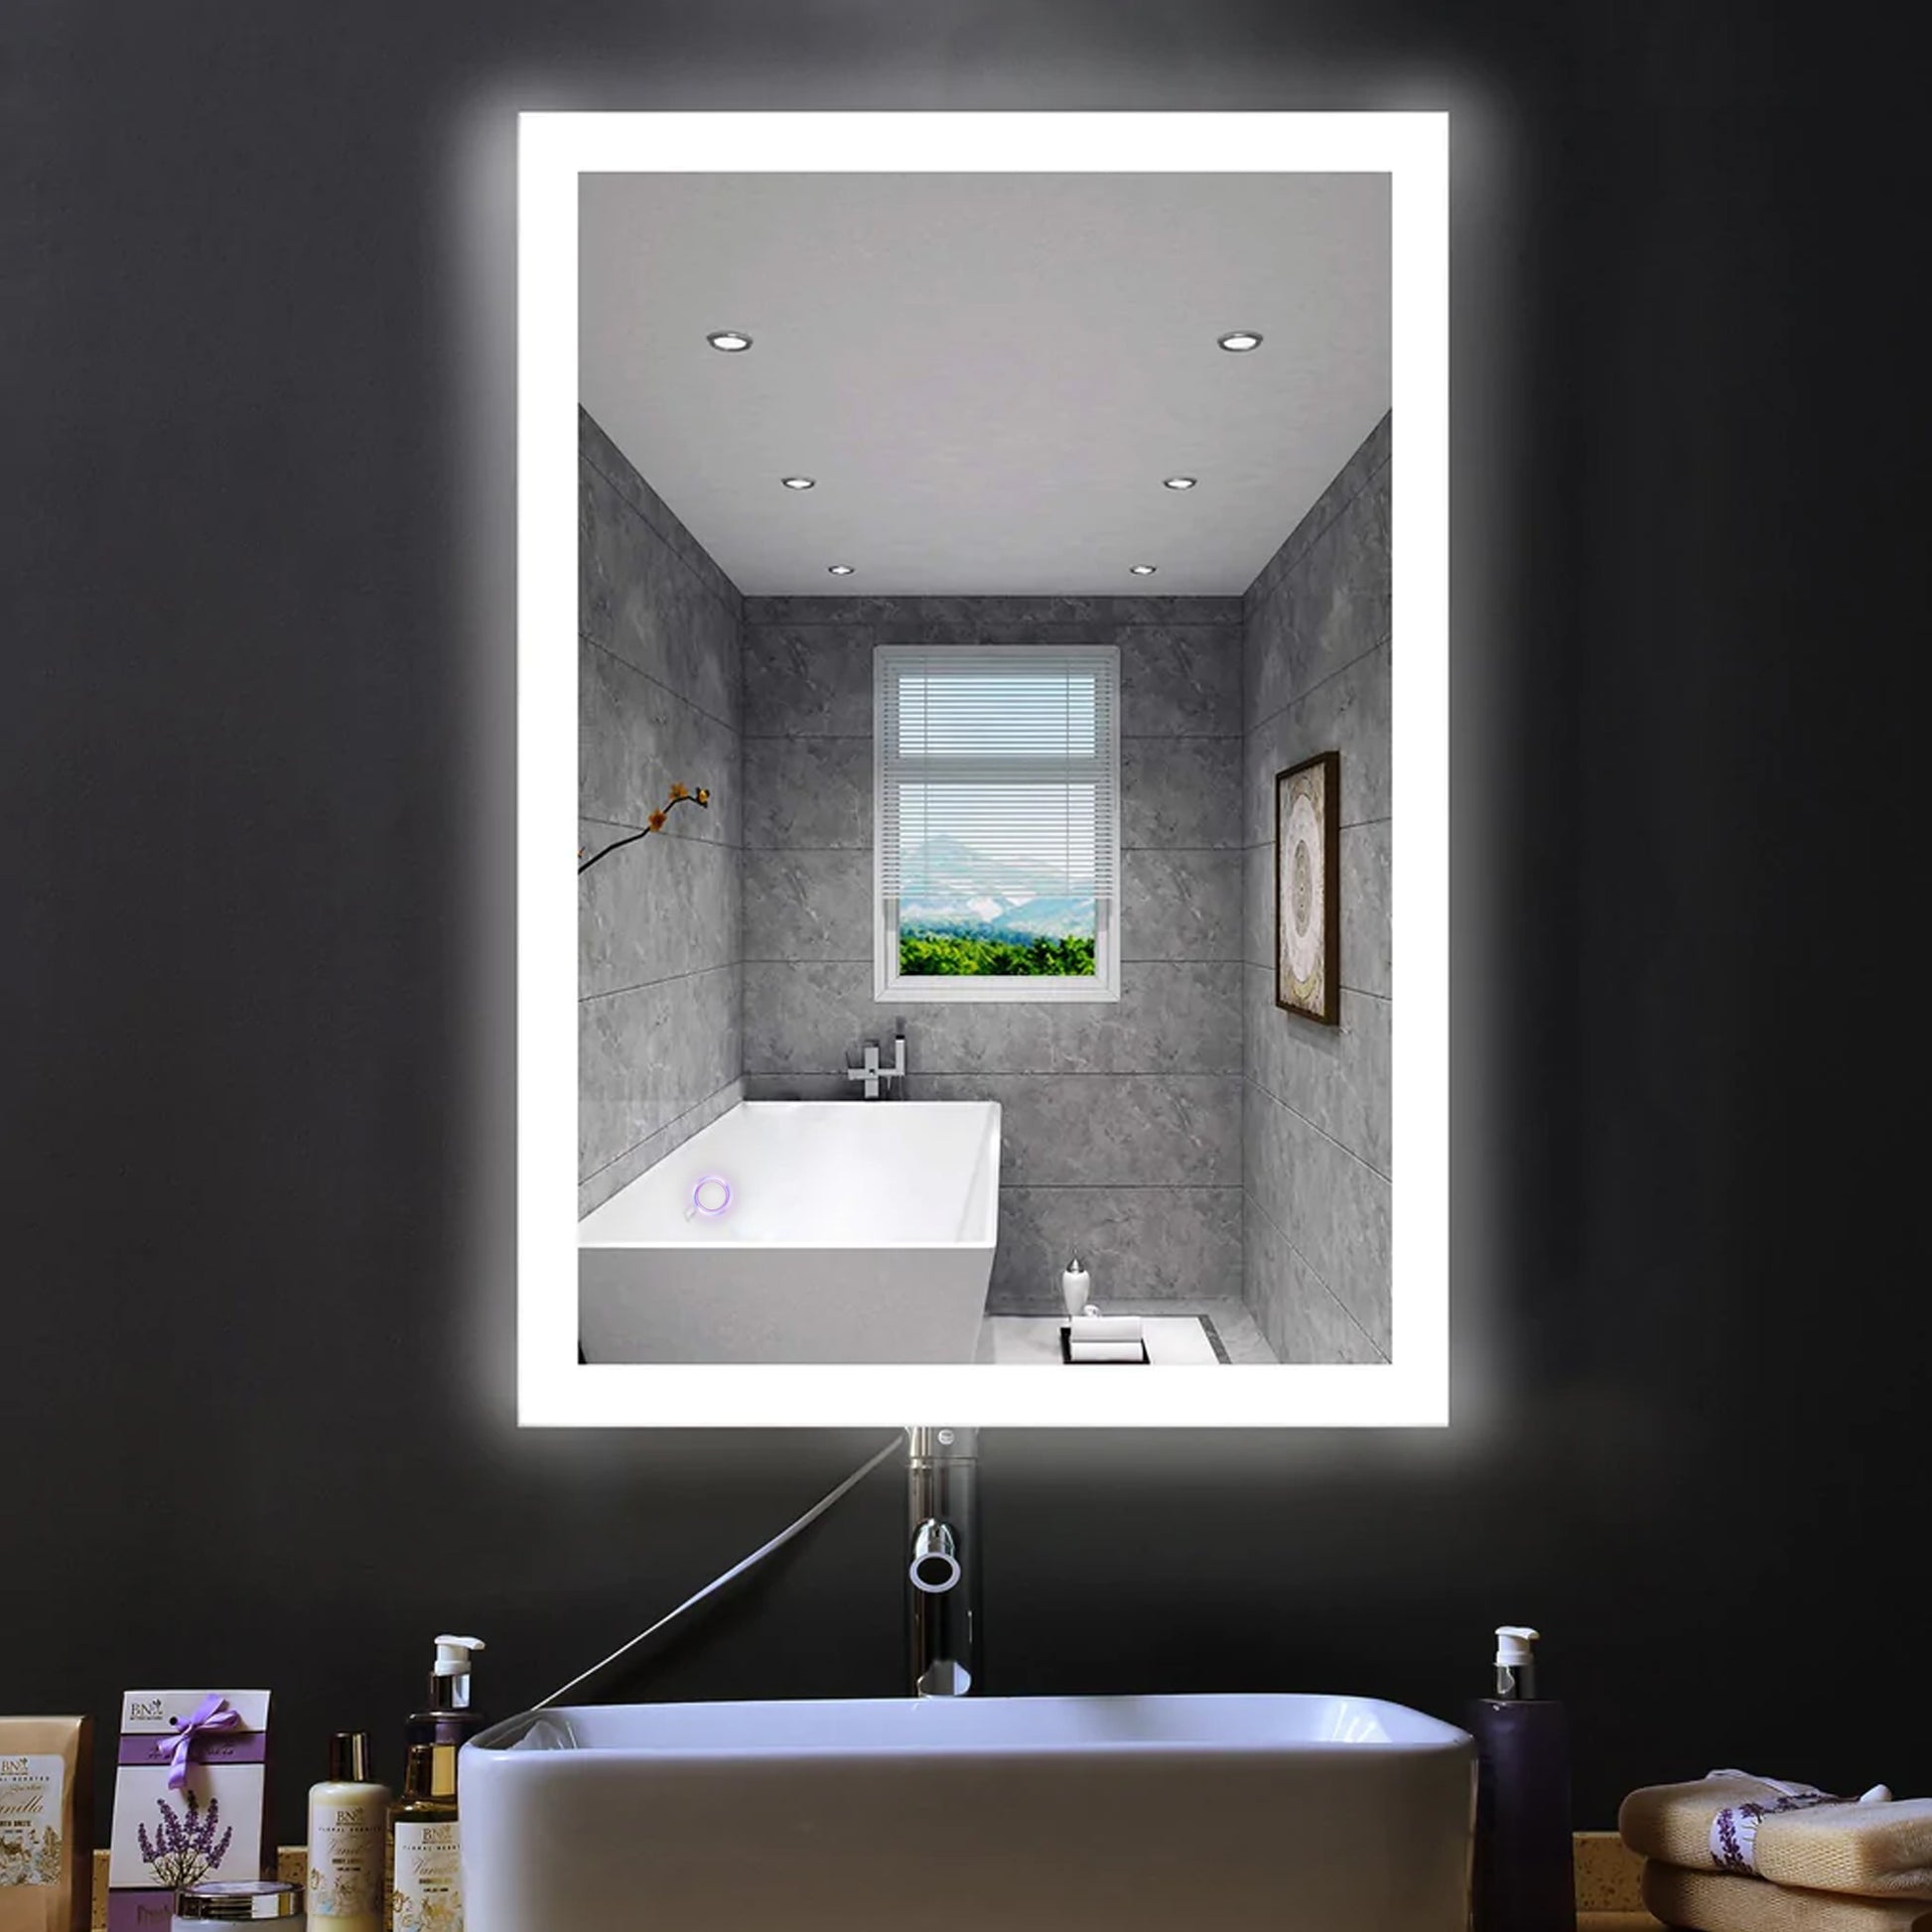 LEDMyplace LED Bathroom Lighted Mirror 36x36 Inch, Window Style Lighted Vanity Mirror Includes Defogger, Touch Switch Controls LED Light wit - 1